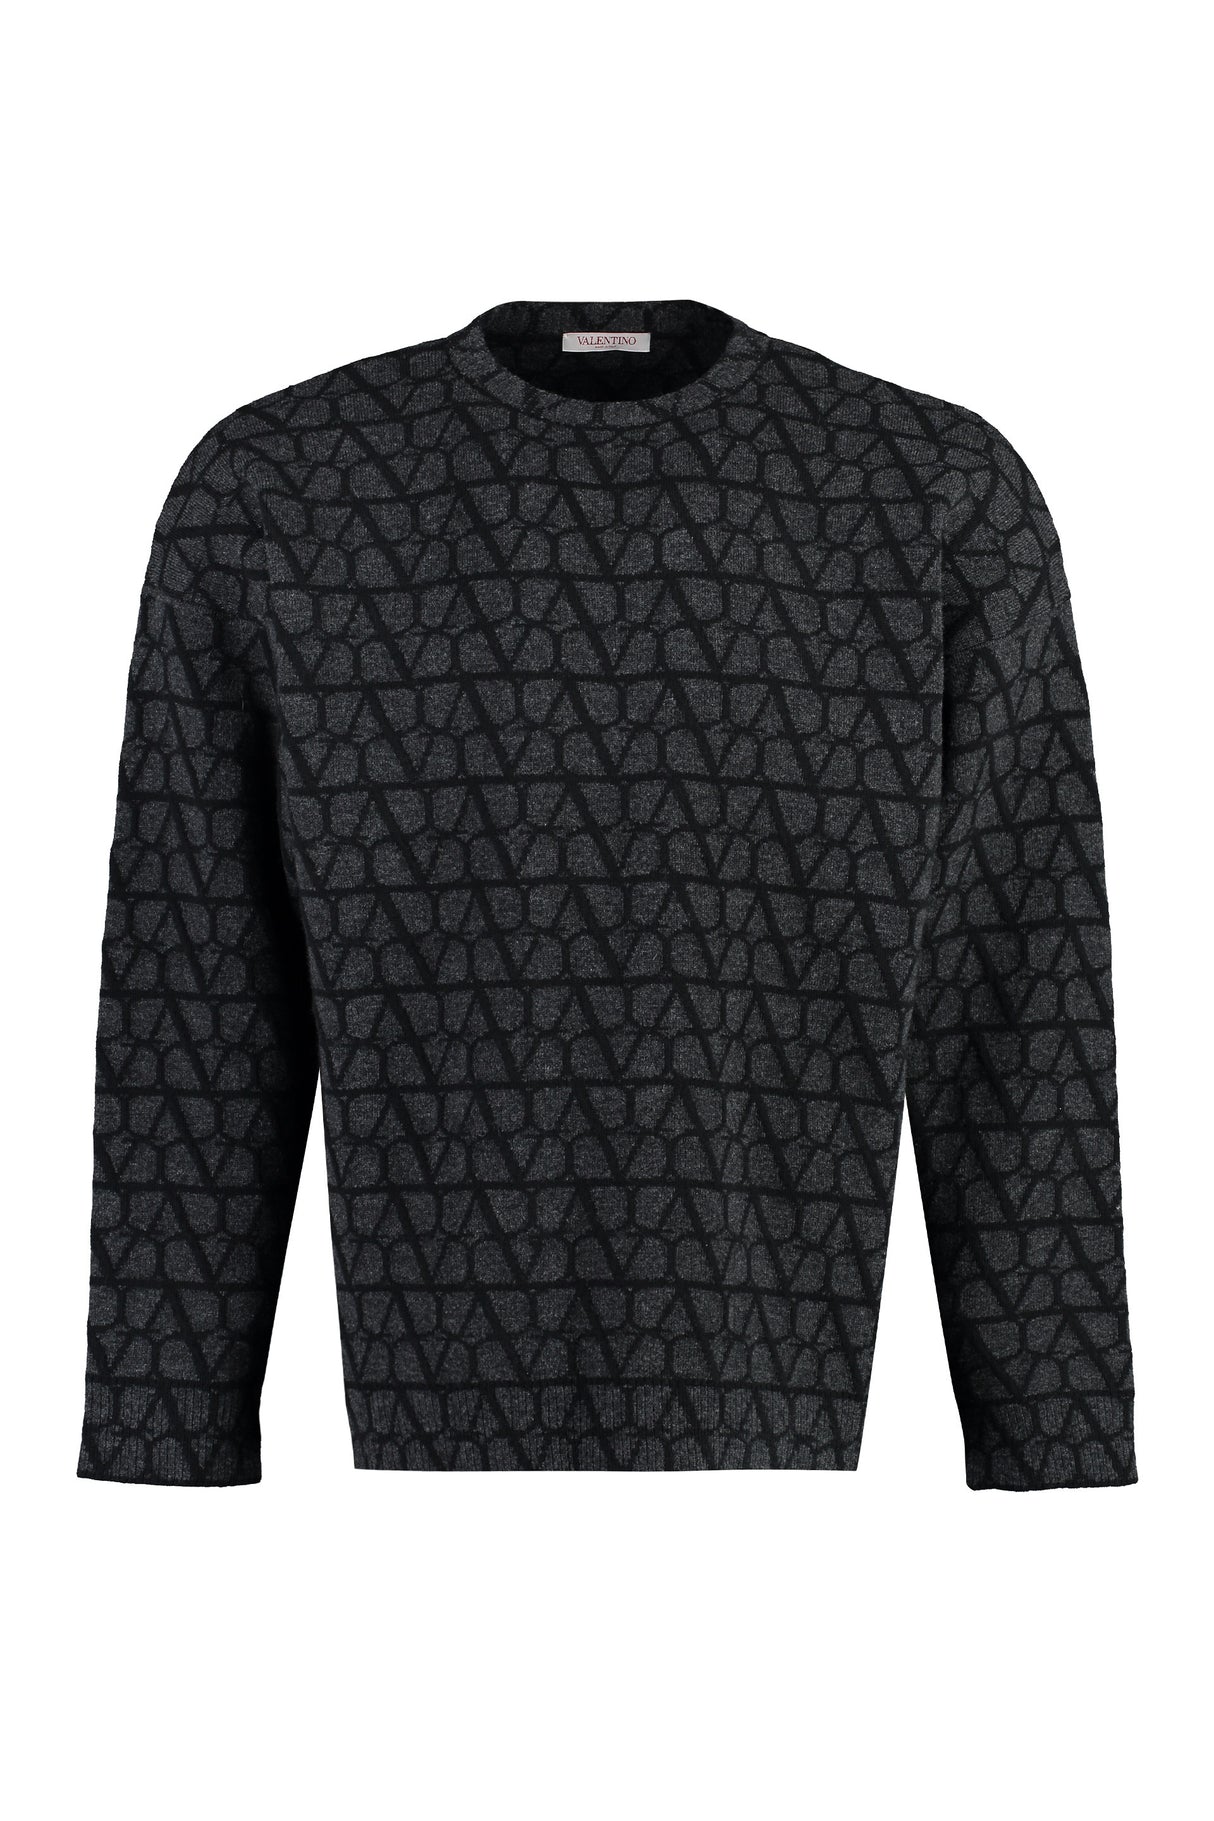 VALENTINO Men's Grey Crew-Neck Wool Sweater with Iconic All-Over Motif